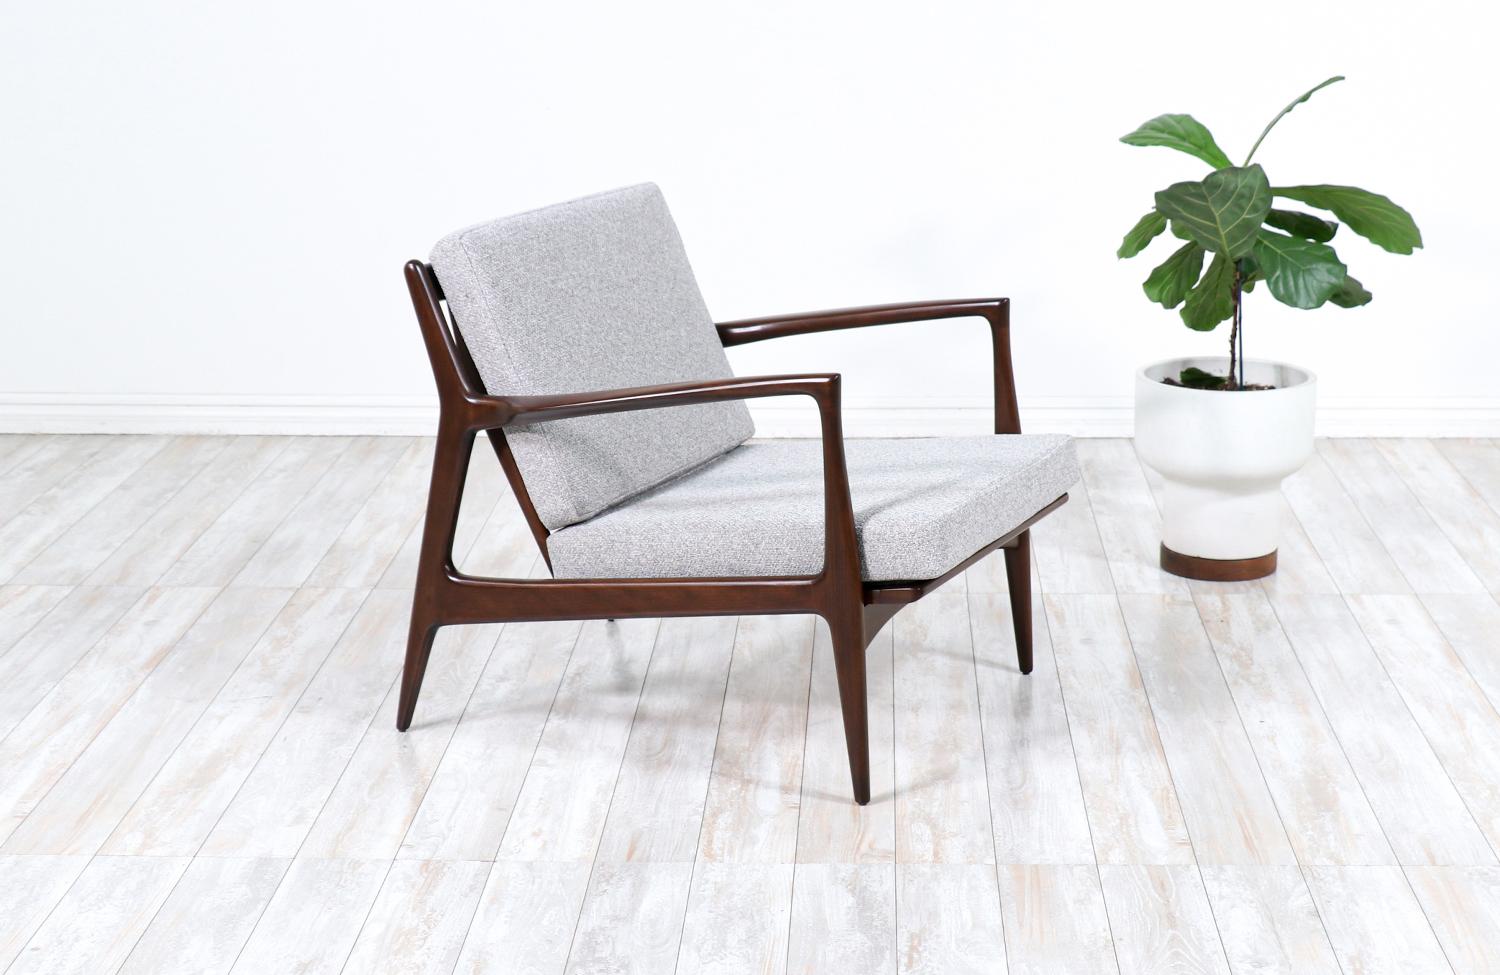 Stylish lounge chair designed by Ib Kofod-Larsen for Selig in Denmark circa 1960s. This sleek and ergonomic lounge chair features a sturdy walnut-stained beechwood frame with angled legs and a sculptural slatted back that is held in place by a bowed